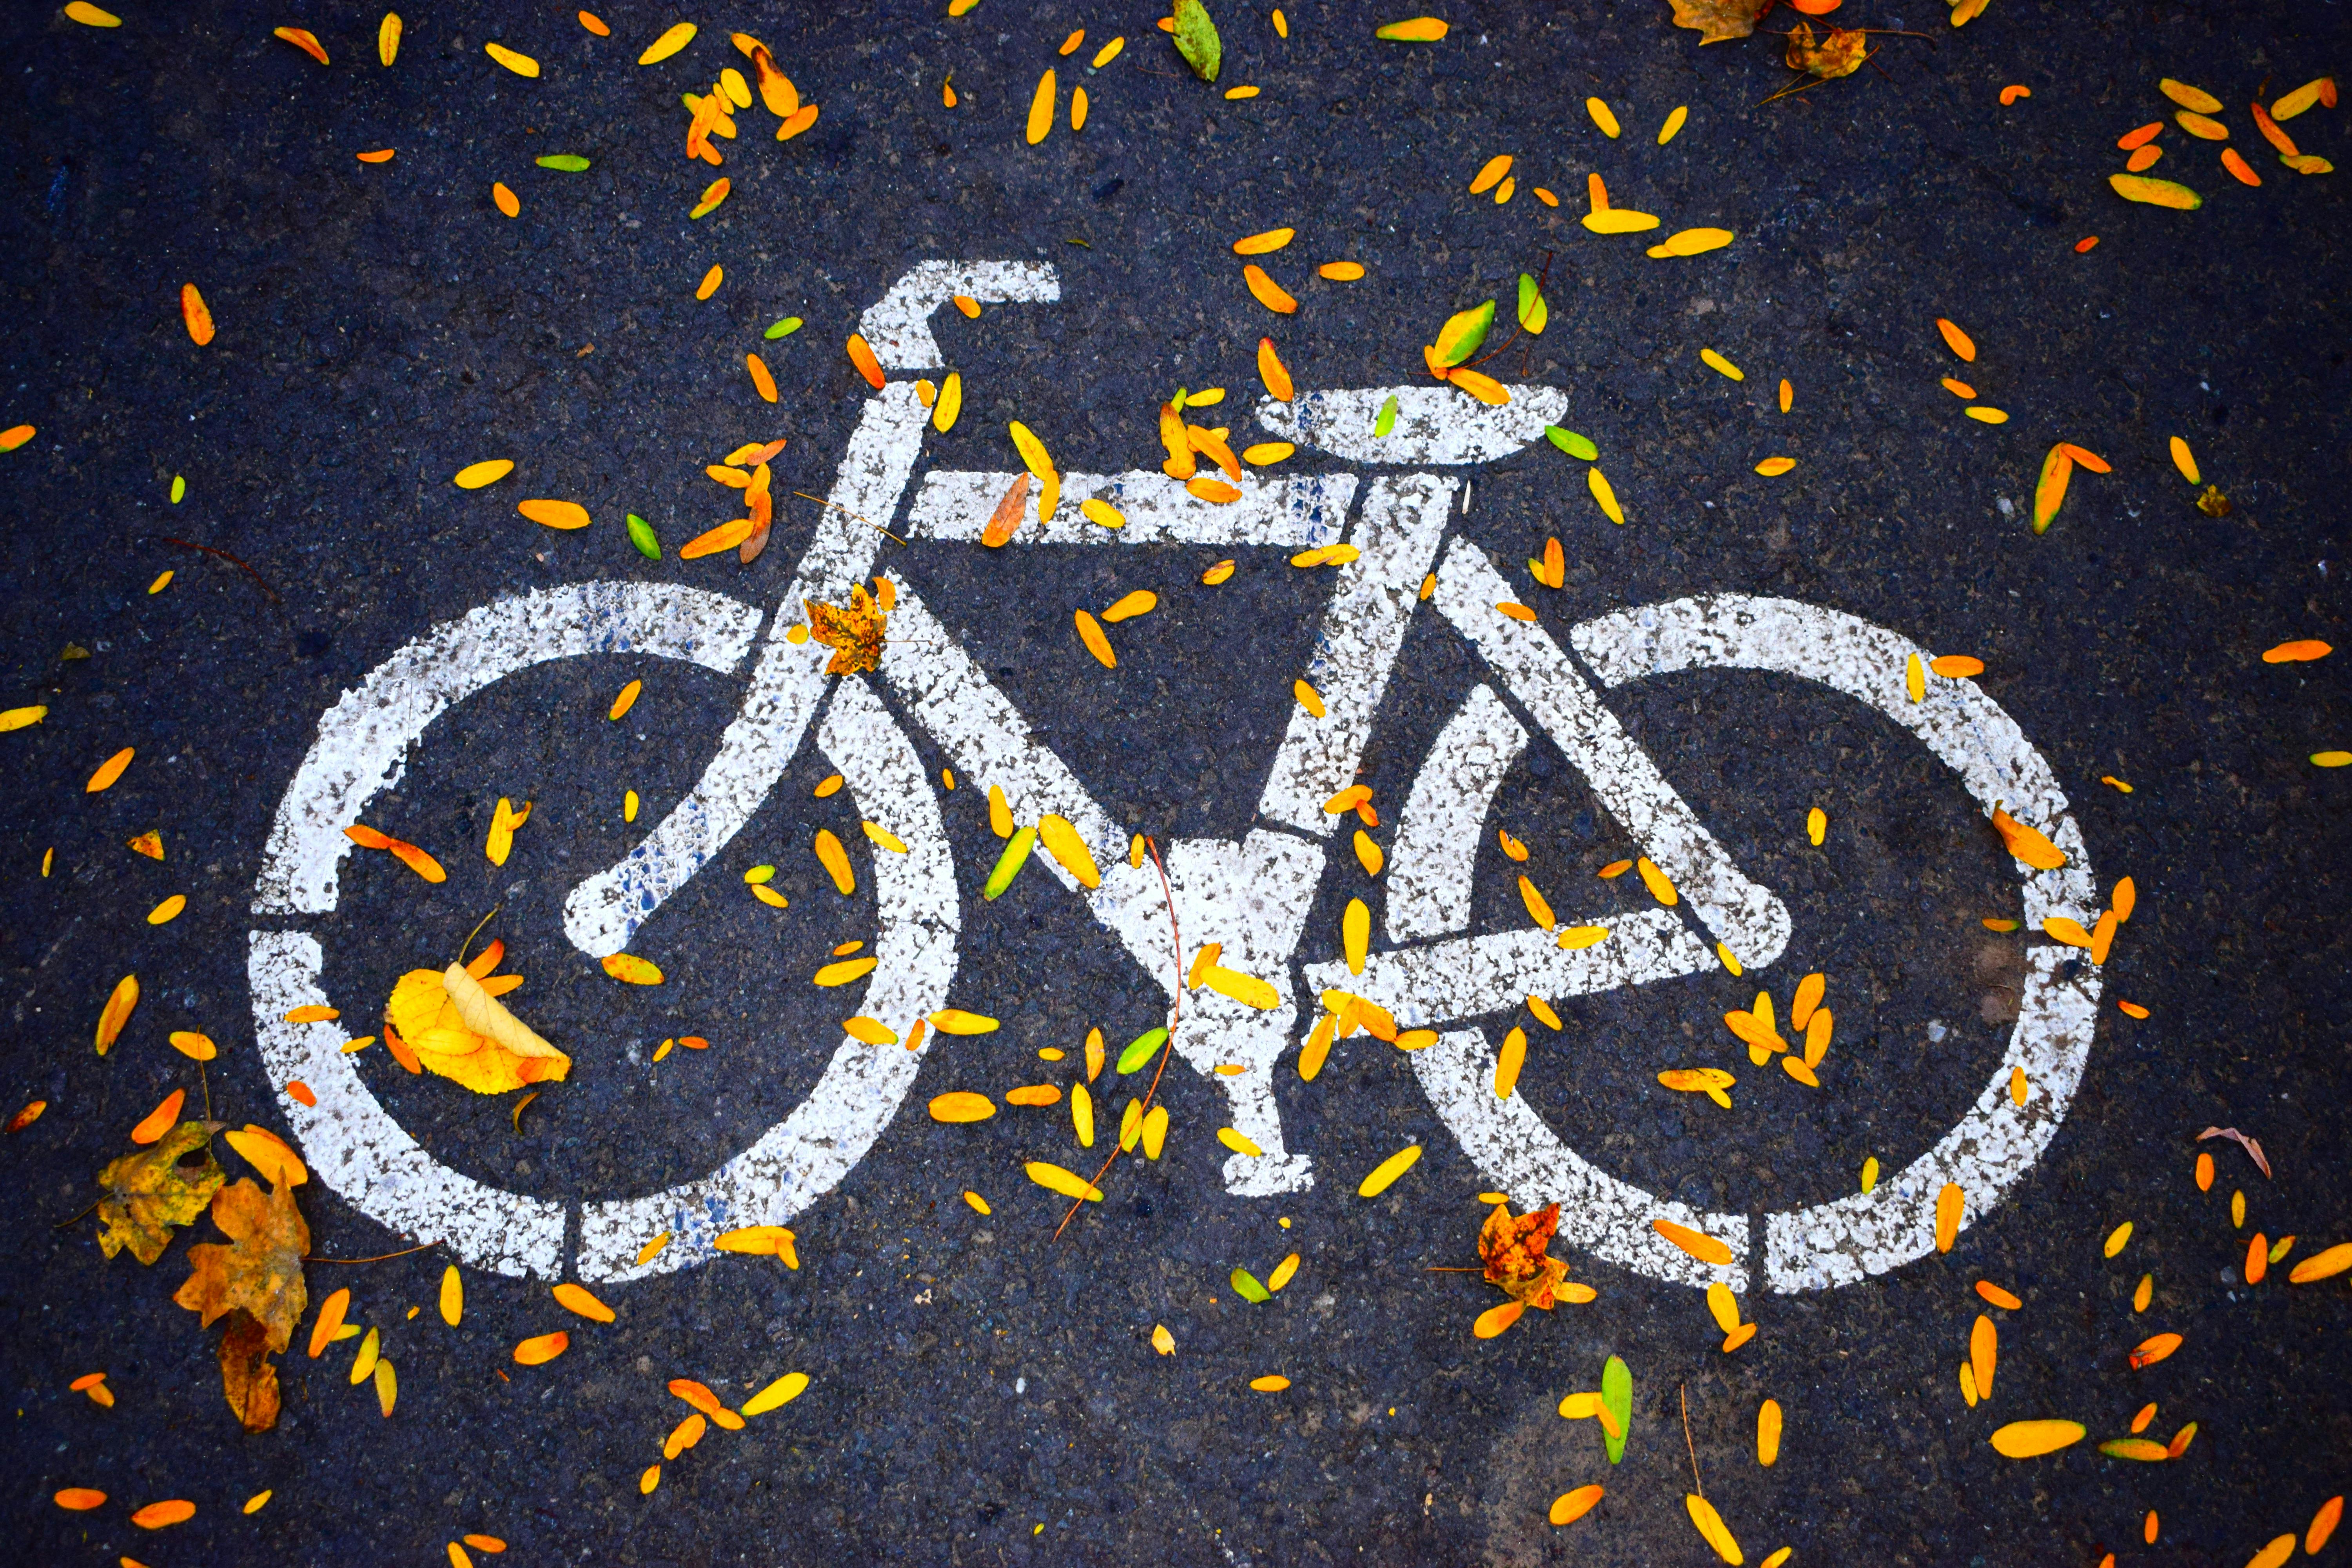 Bicycle Wallpapers HD